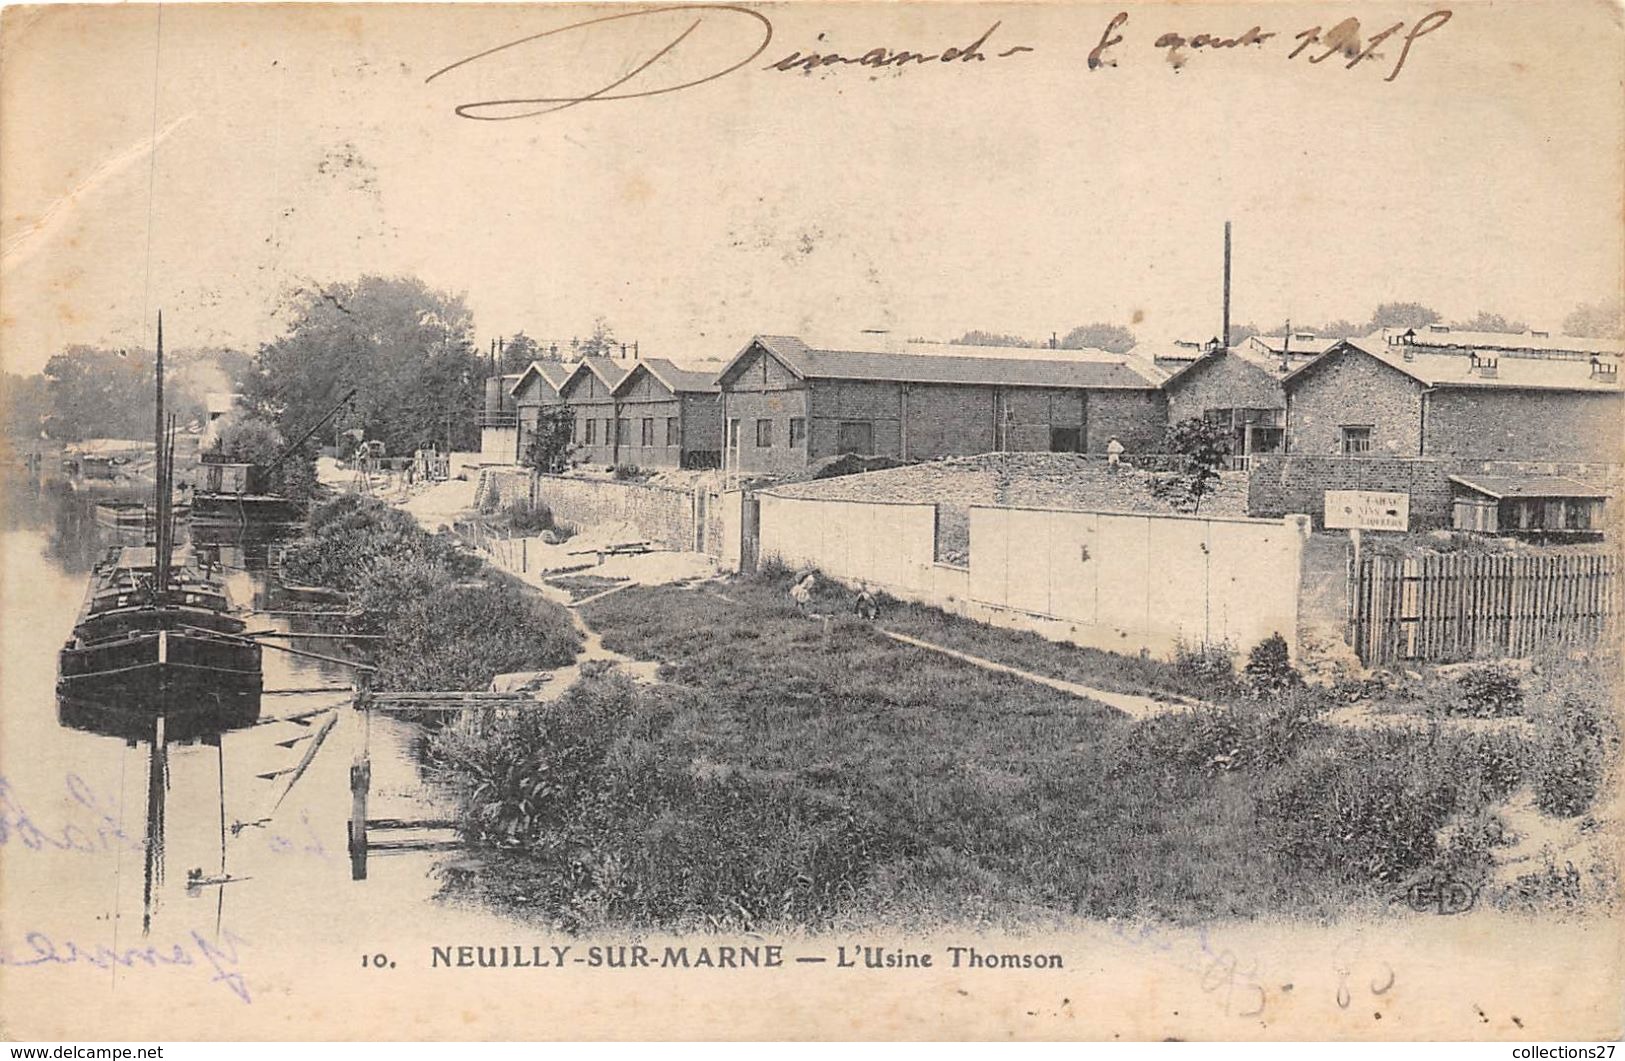 93-NEUILLY-SUR-MARNE- L'USINE THOMSON - Neuilly Sur Marne